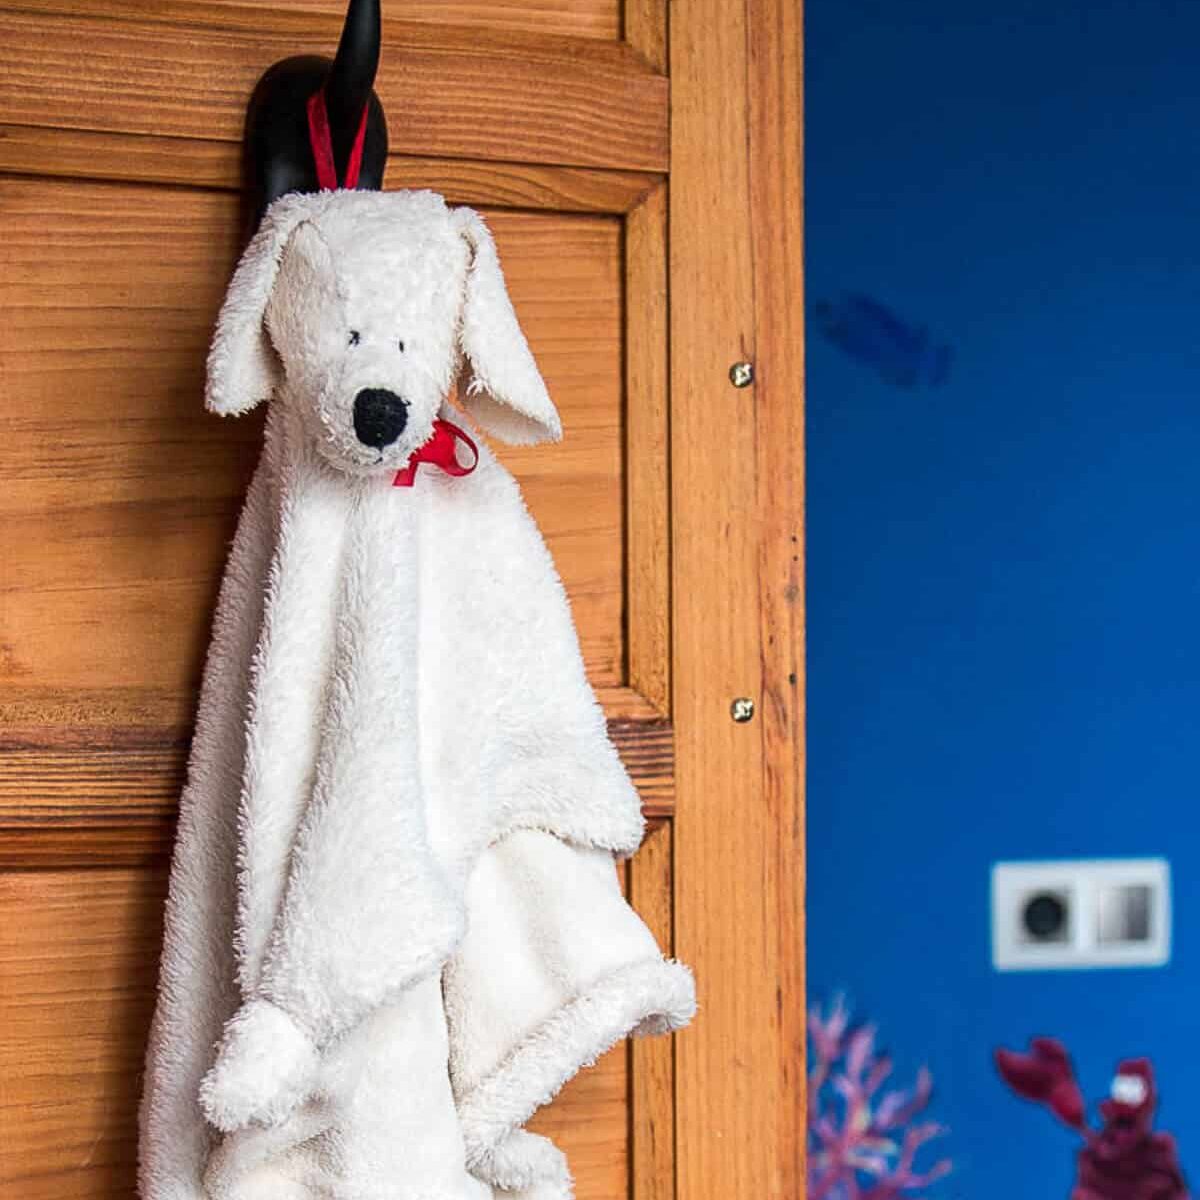 A white fluffy puppy blanket with a stuffed puppy head hanging from the hook on a wood closet door.